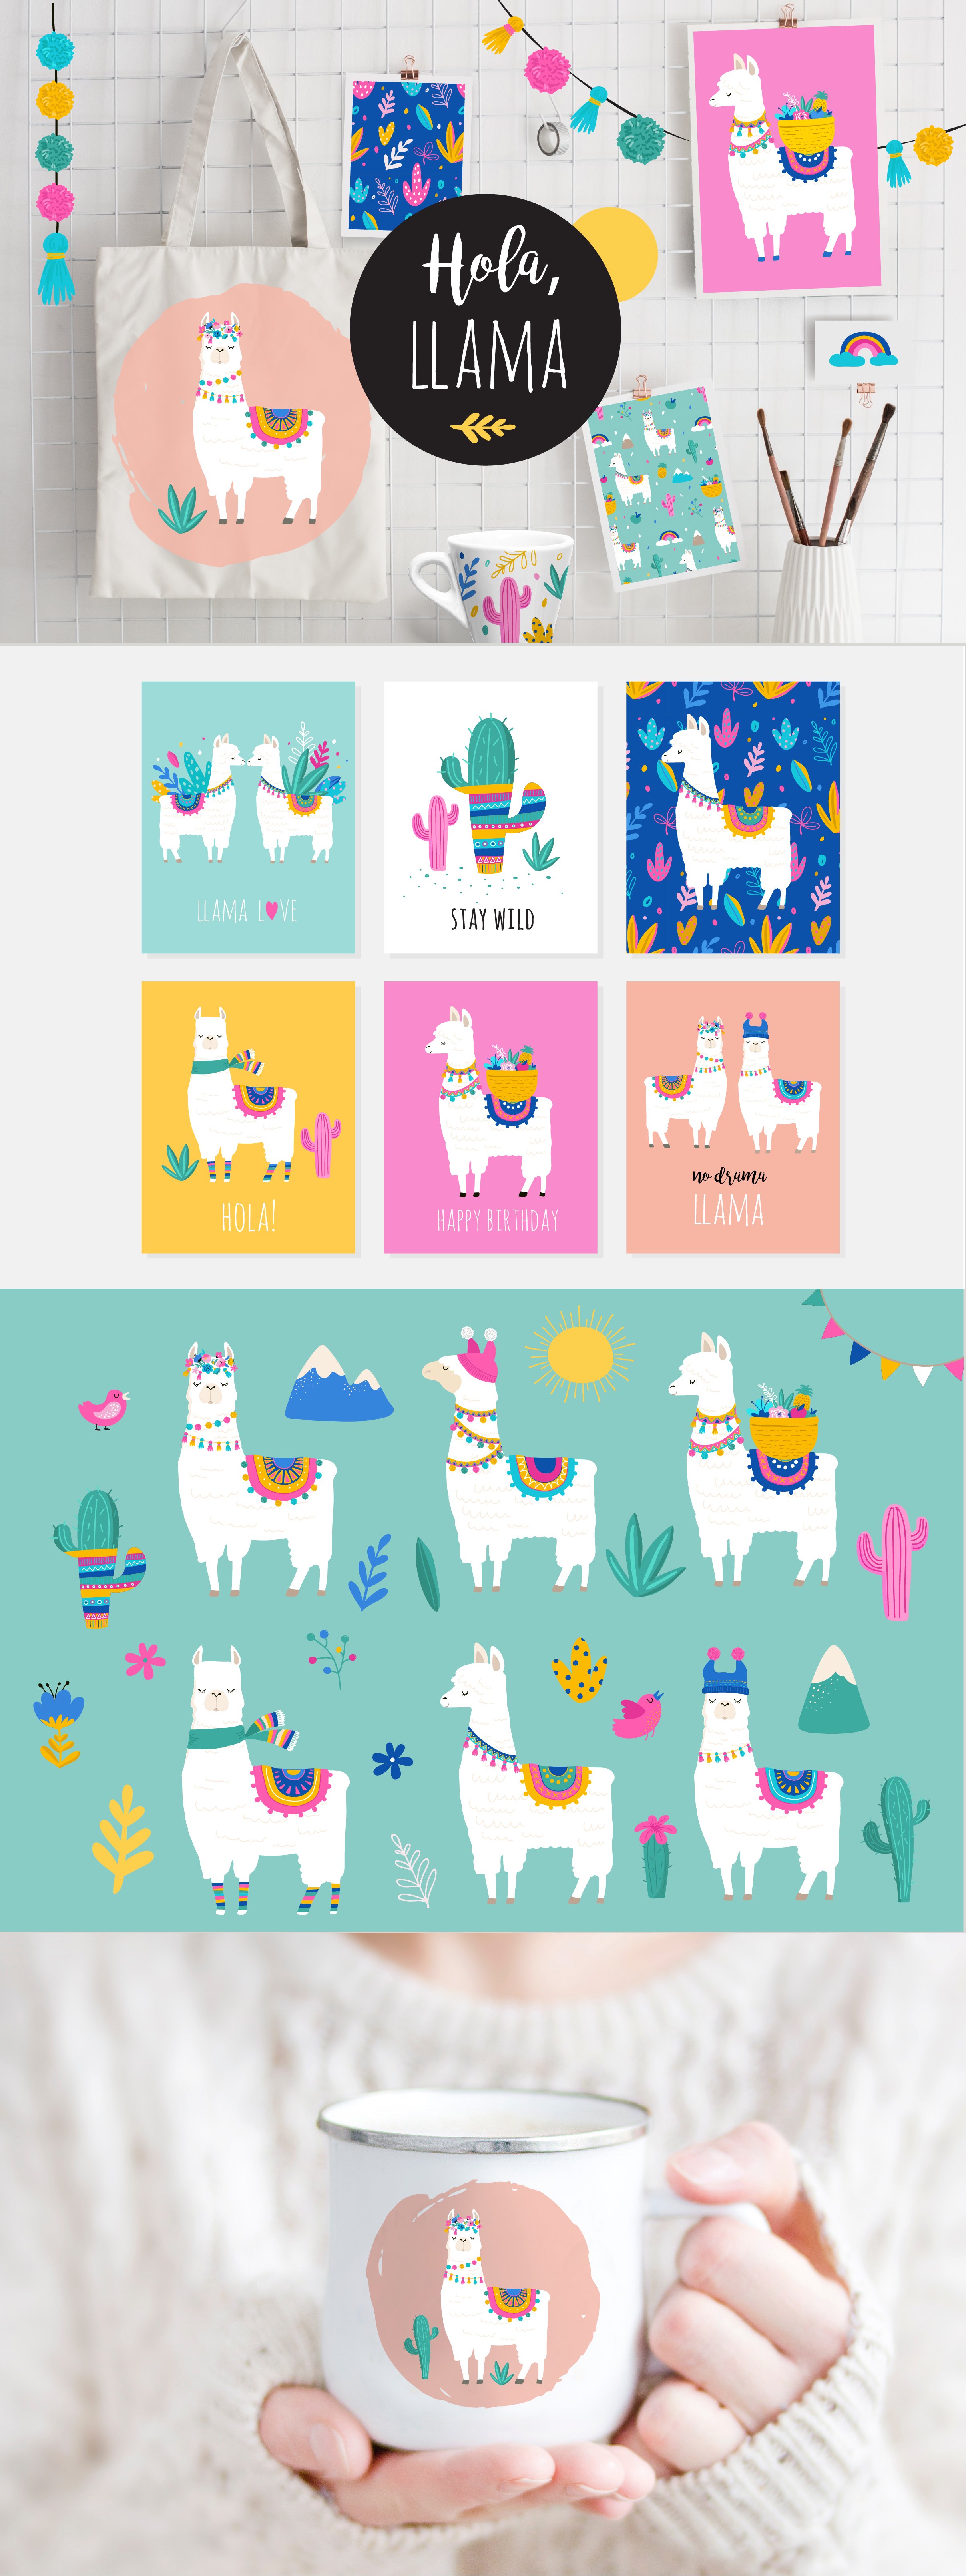 Hola, Llama! Cute summer collection cover image.